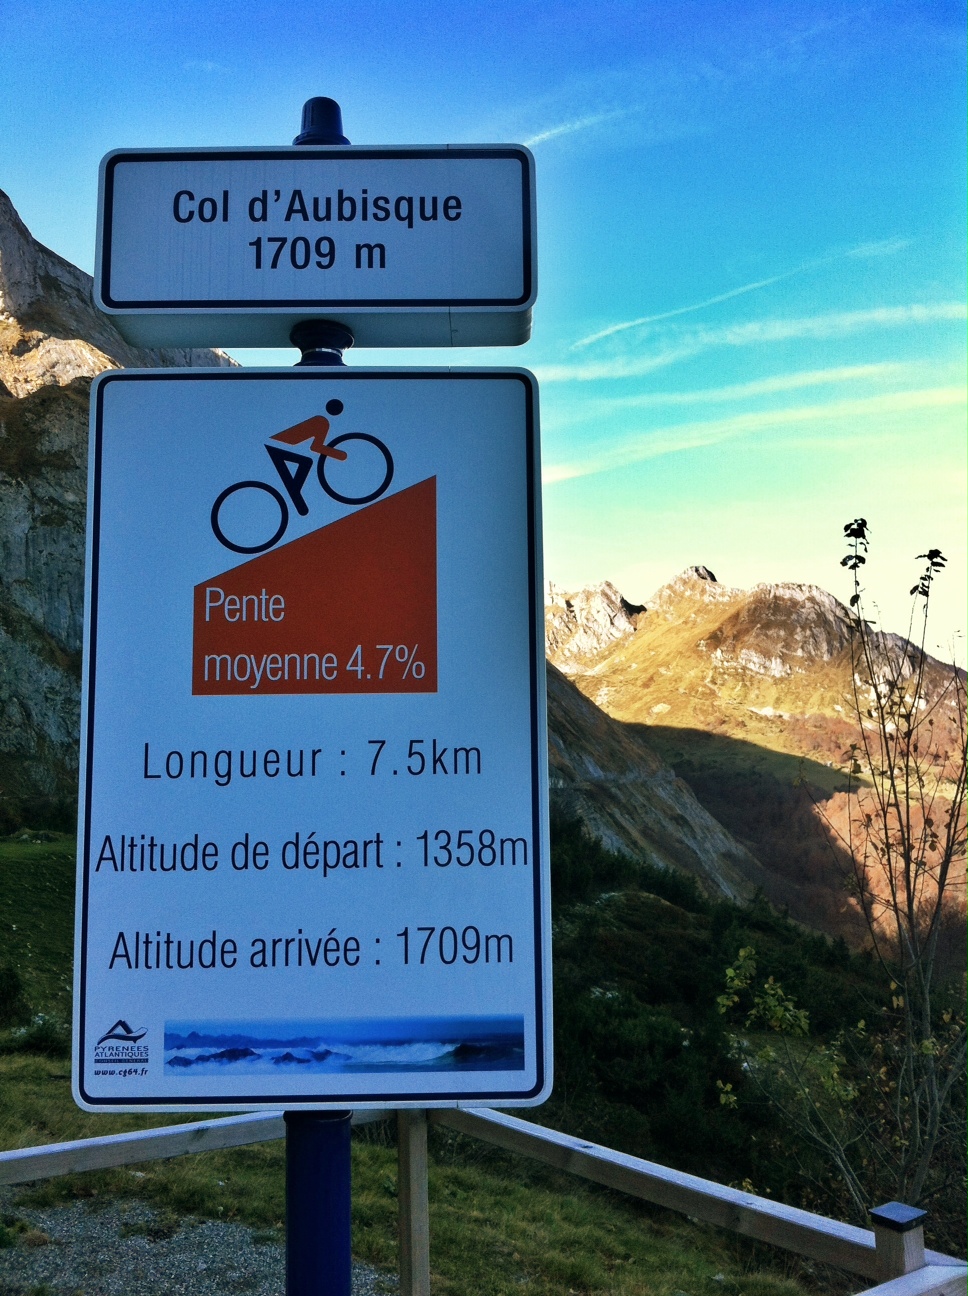 Col d’Aubisque – 2nd Col in the Bag of Cols